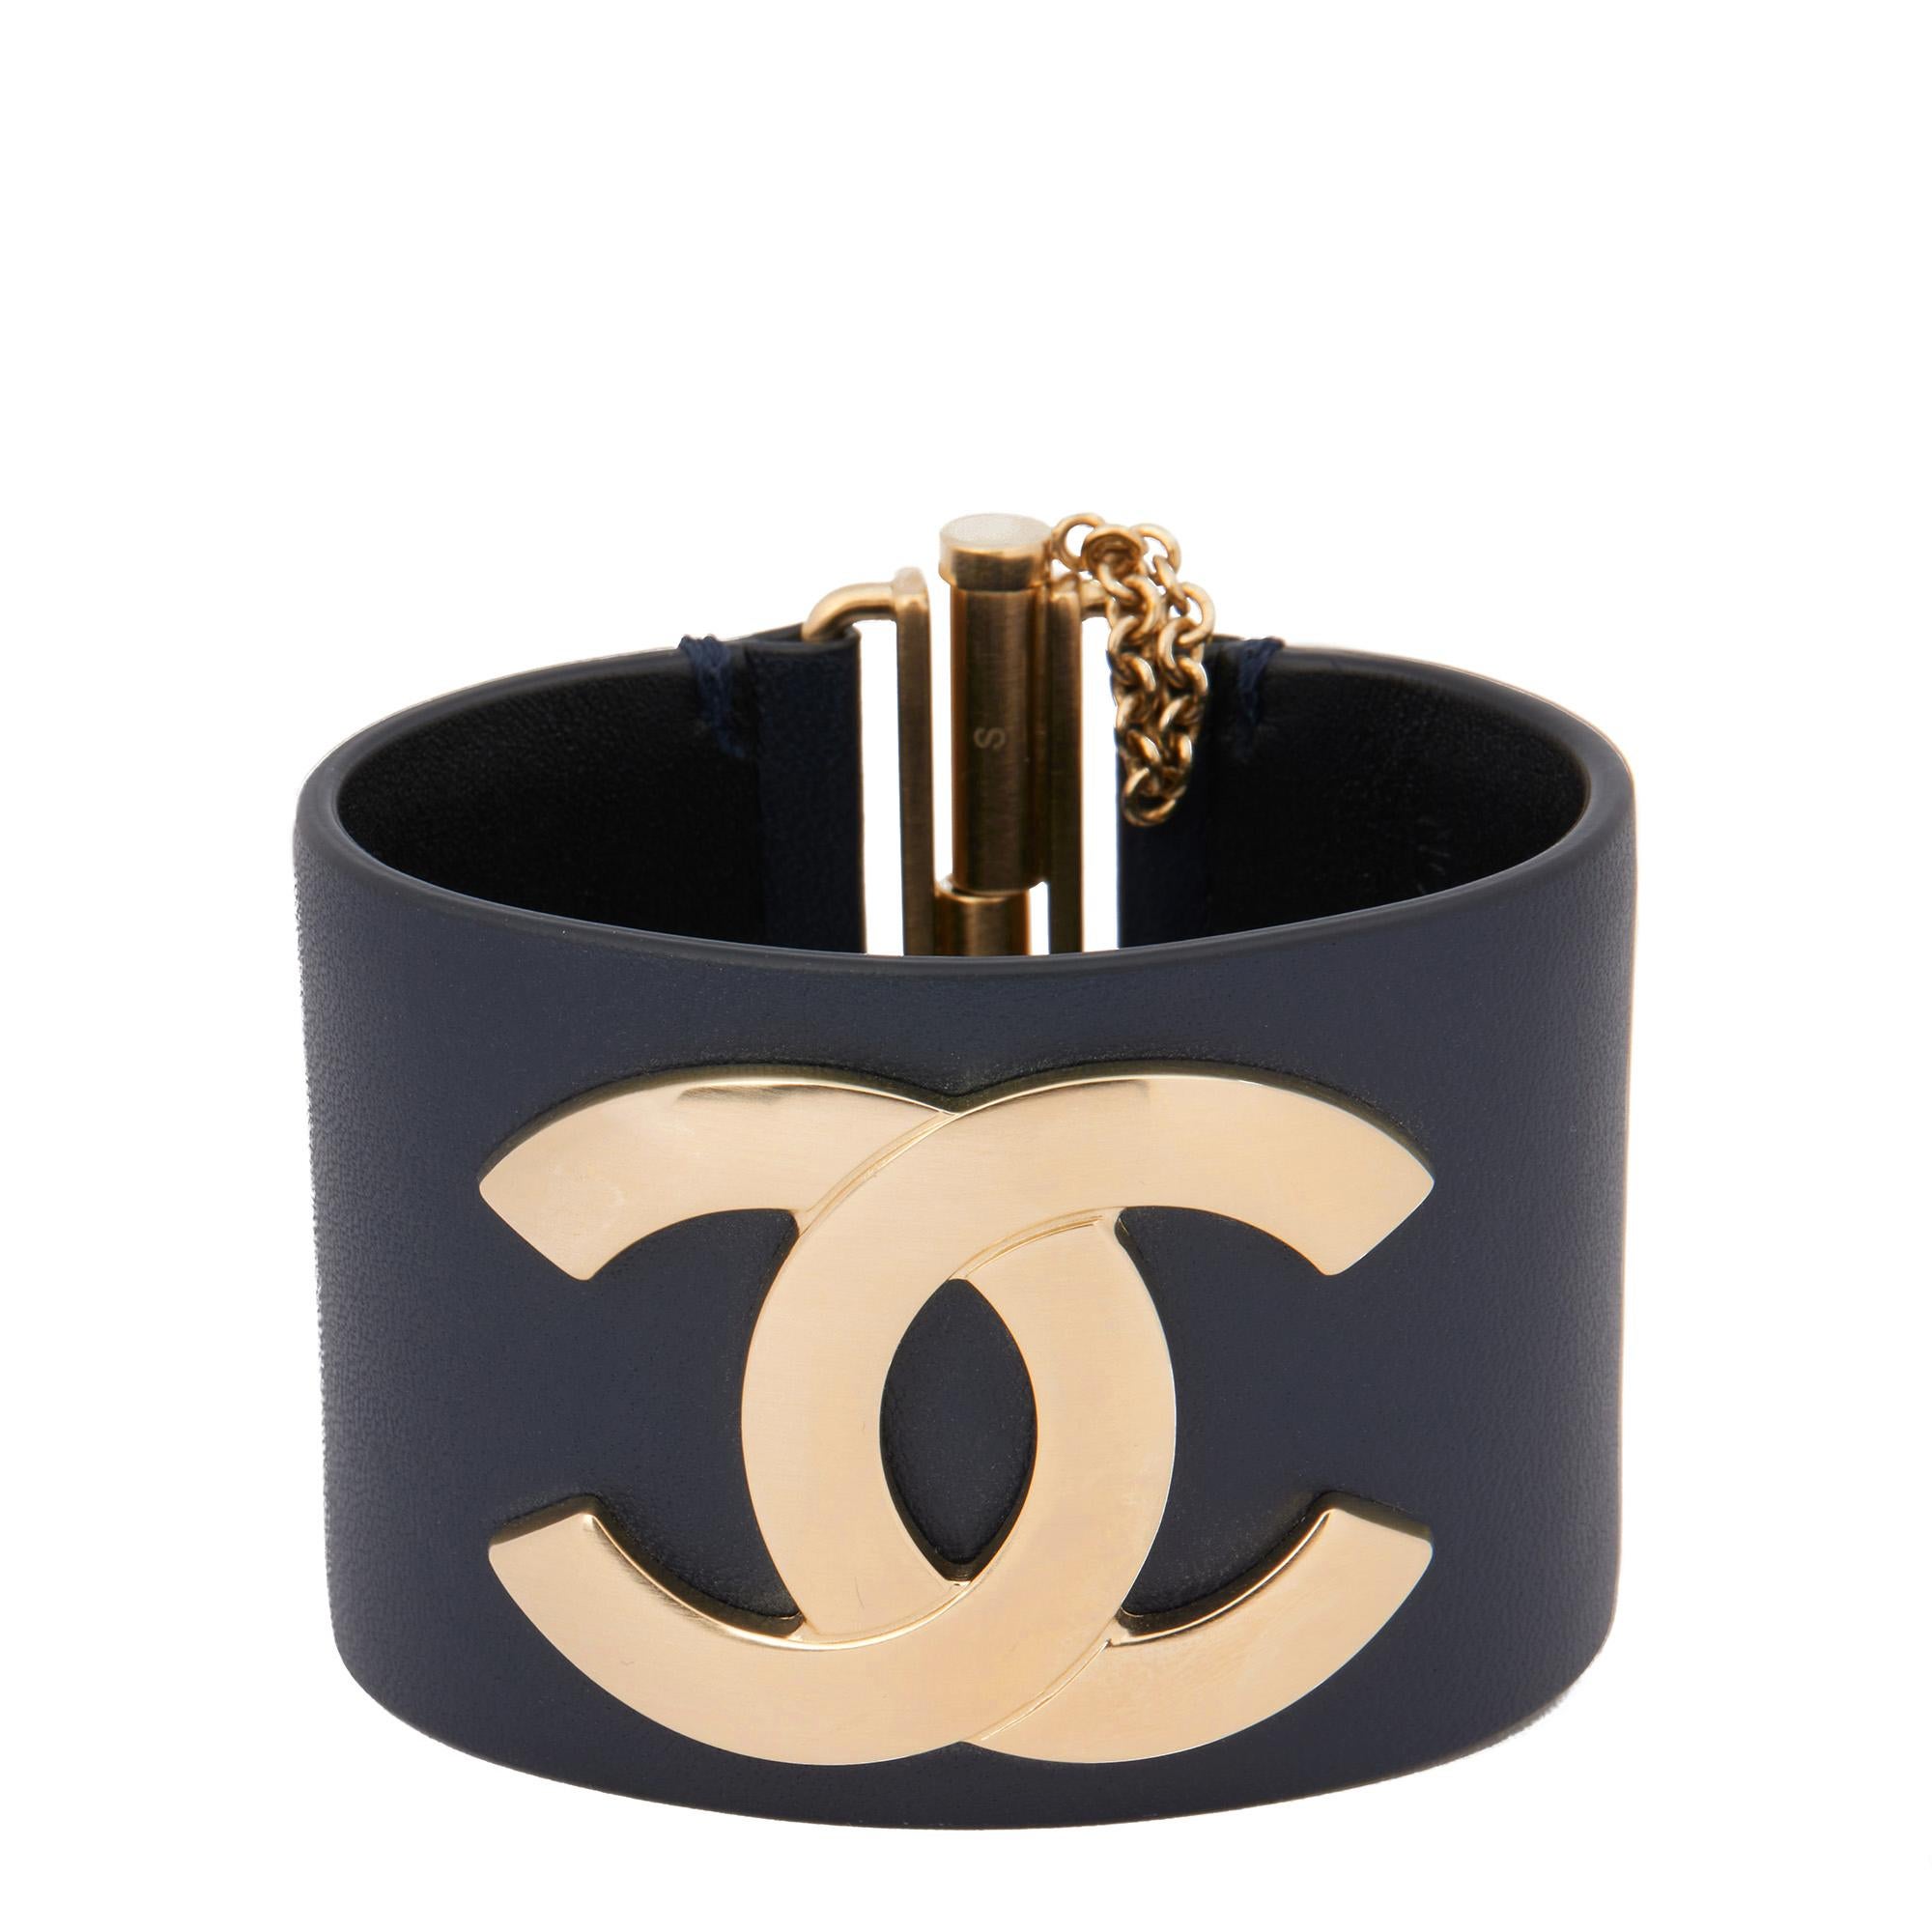 Chanel NAVY LAMBSKIN LEATHER GOLD CC BRACELET

ITEM CONDITION	Excellent
XUPES REFERENCE	AAJ015
MANUFACTURER	Chanel
AGE	2018
ACCOMPANIED BY	Chanel Box and Pouch
BRACELET WIDTH	64mm
BRACELET LENGTH	45mm
TOTAL WEIGHT	57g